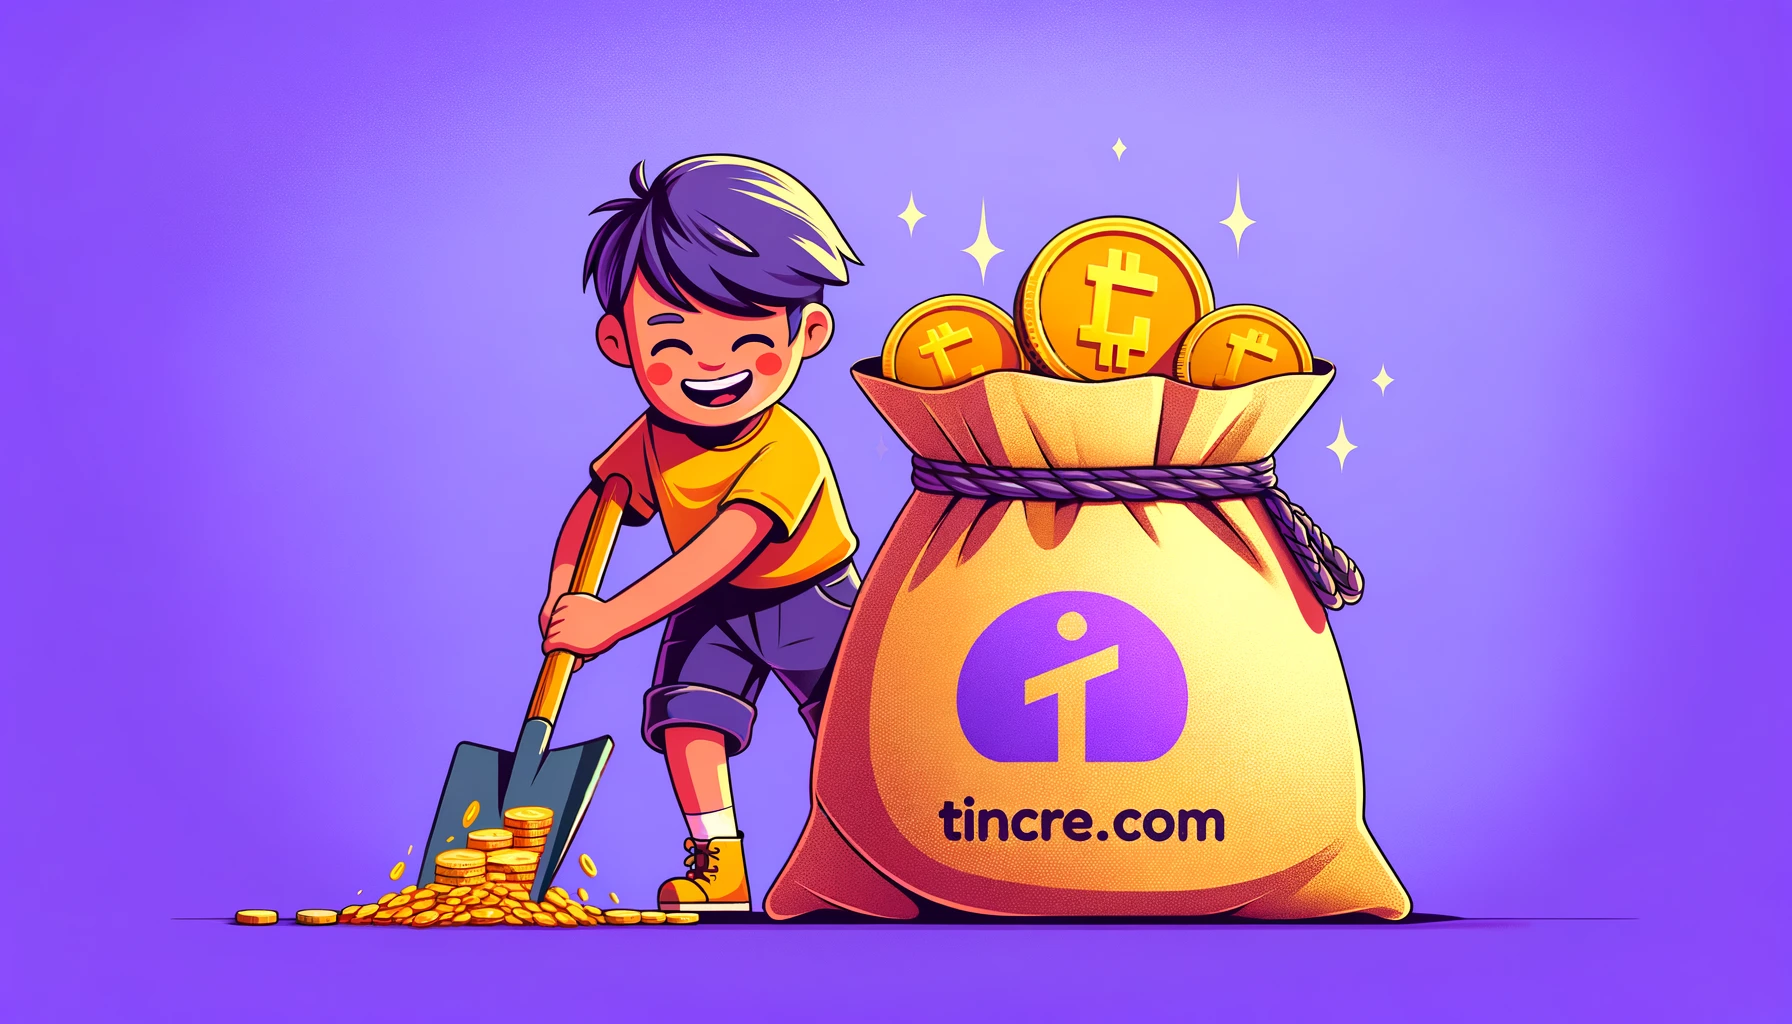 Finally, it’s here. The tincre.com referral program. Send your link to your friend, they run ads, you get paid.